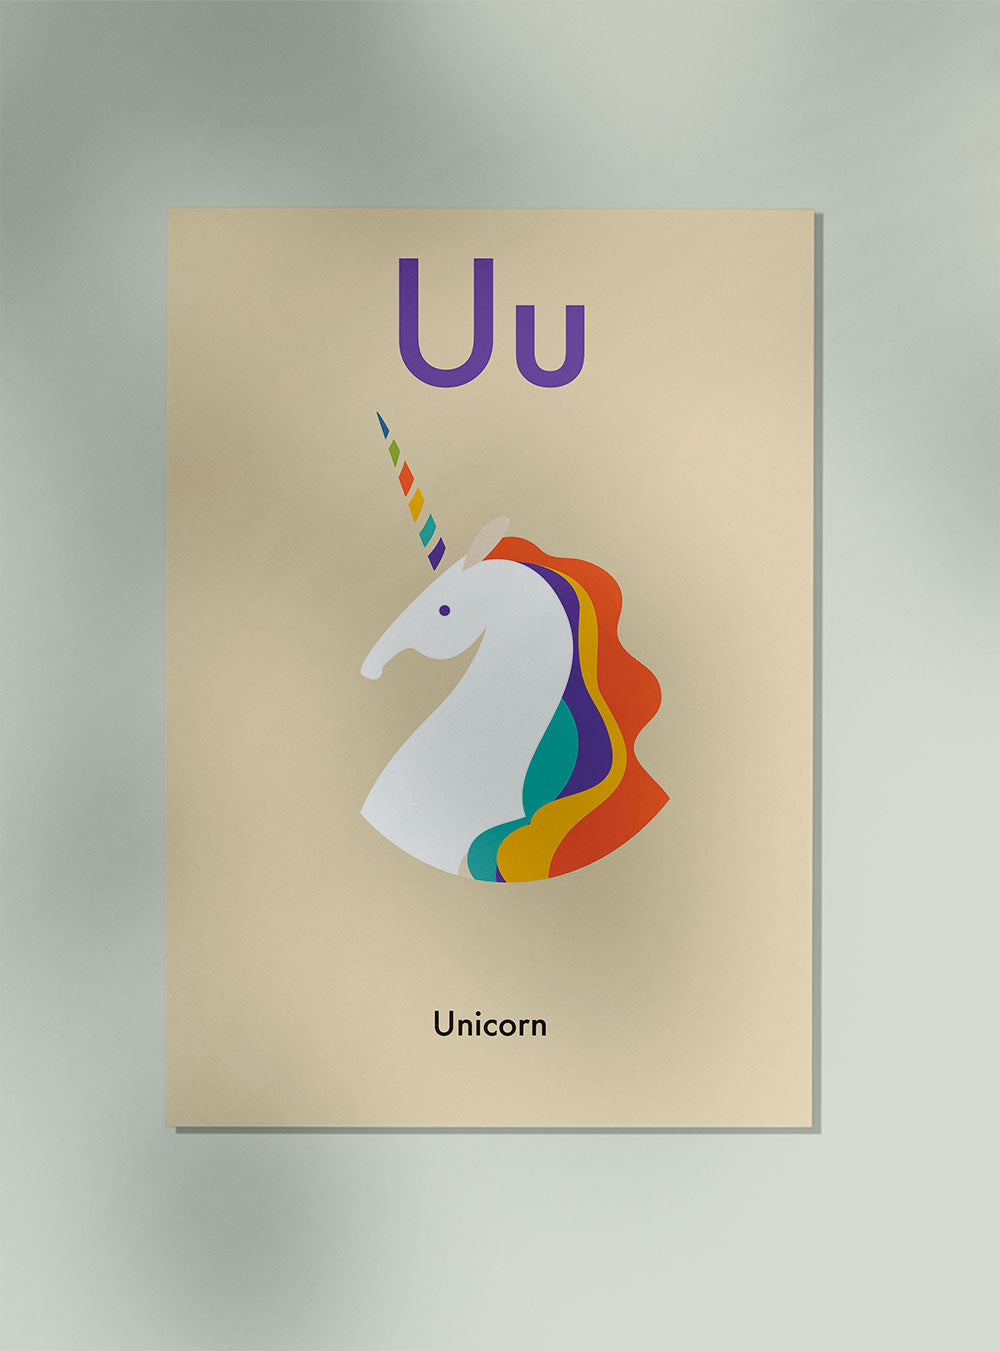 U for unicorn - Children's Alphabet Poster in German and English